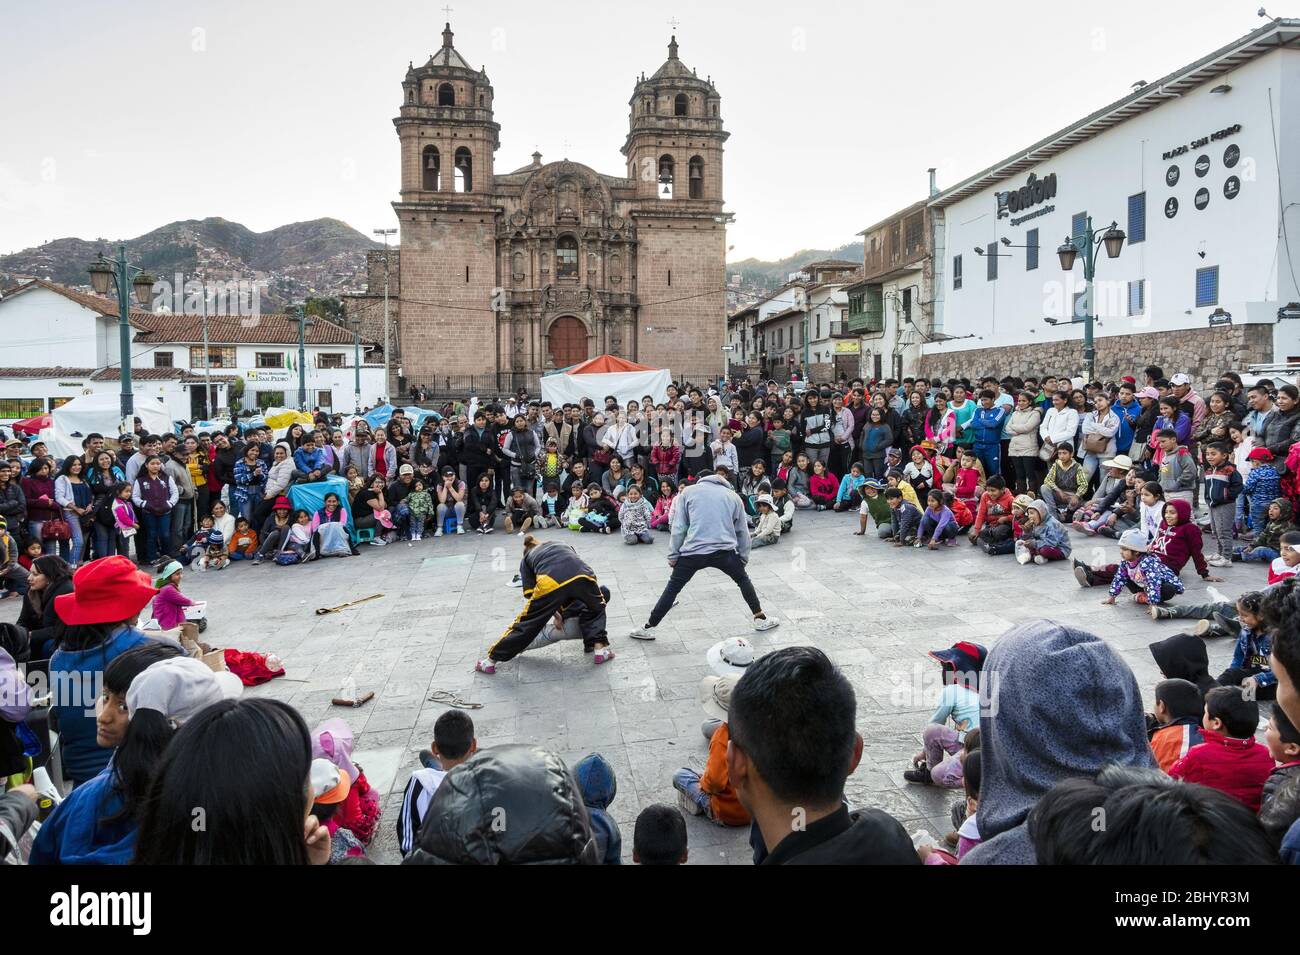 Street performers entertaining the locals in front of St. Peter's Church in the Plazoleta San Pedro, Cusco, Peru Stock Photo